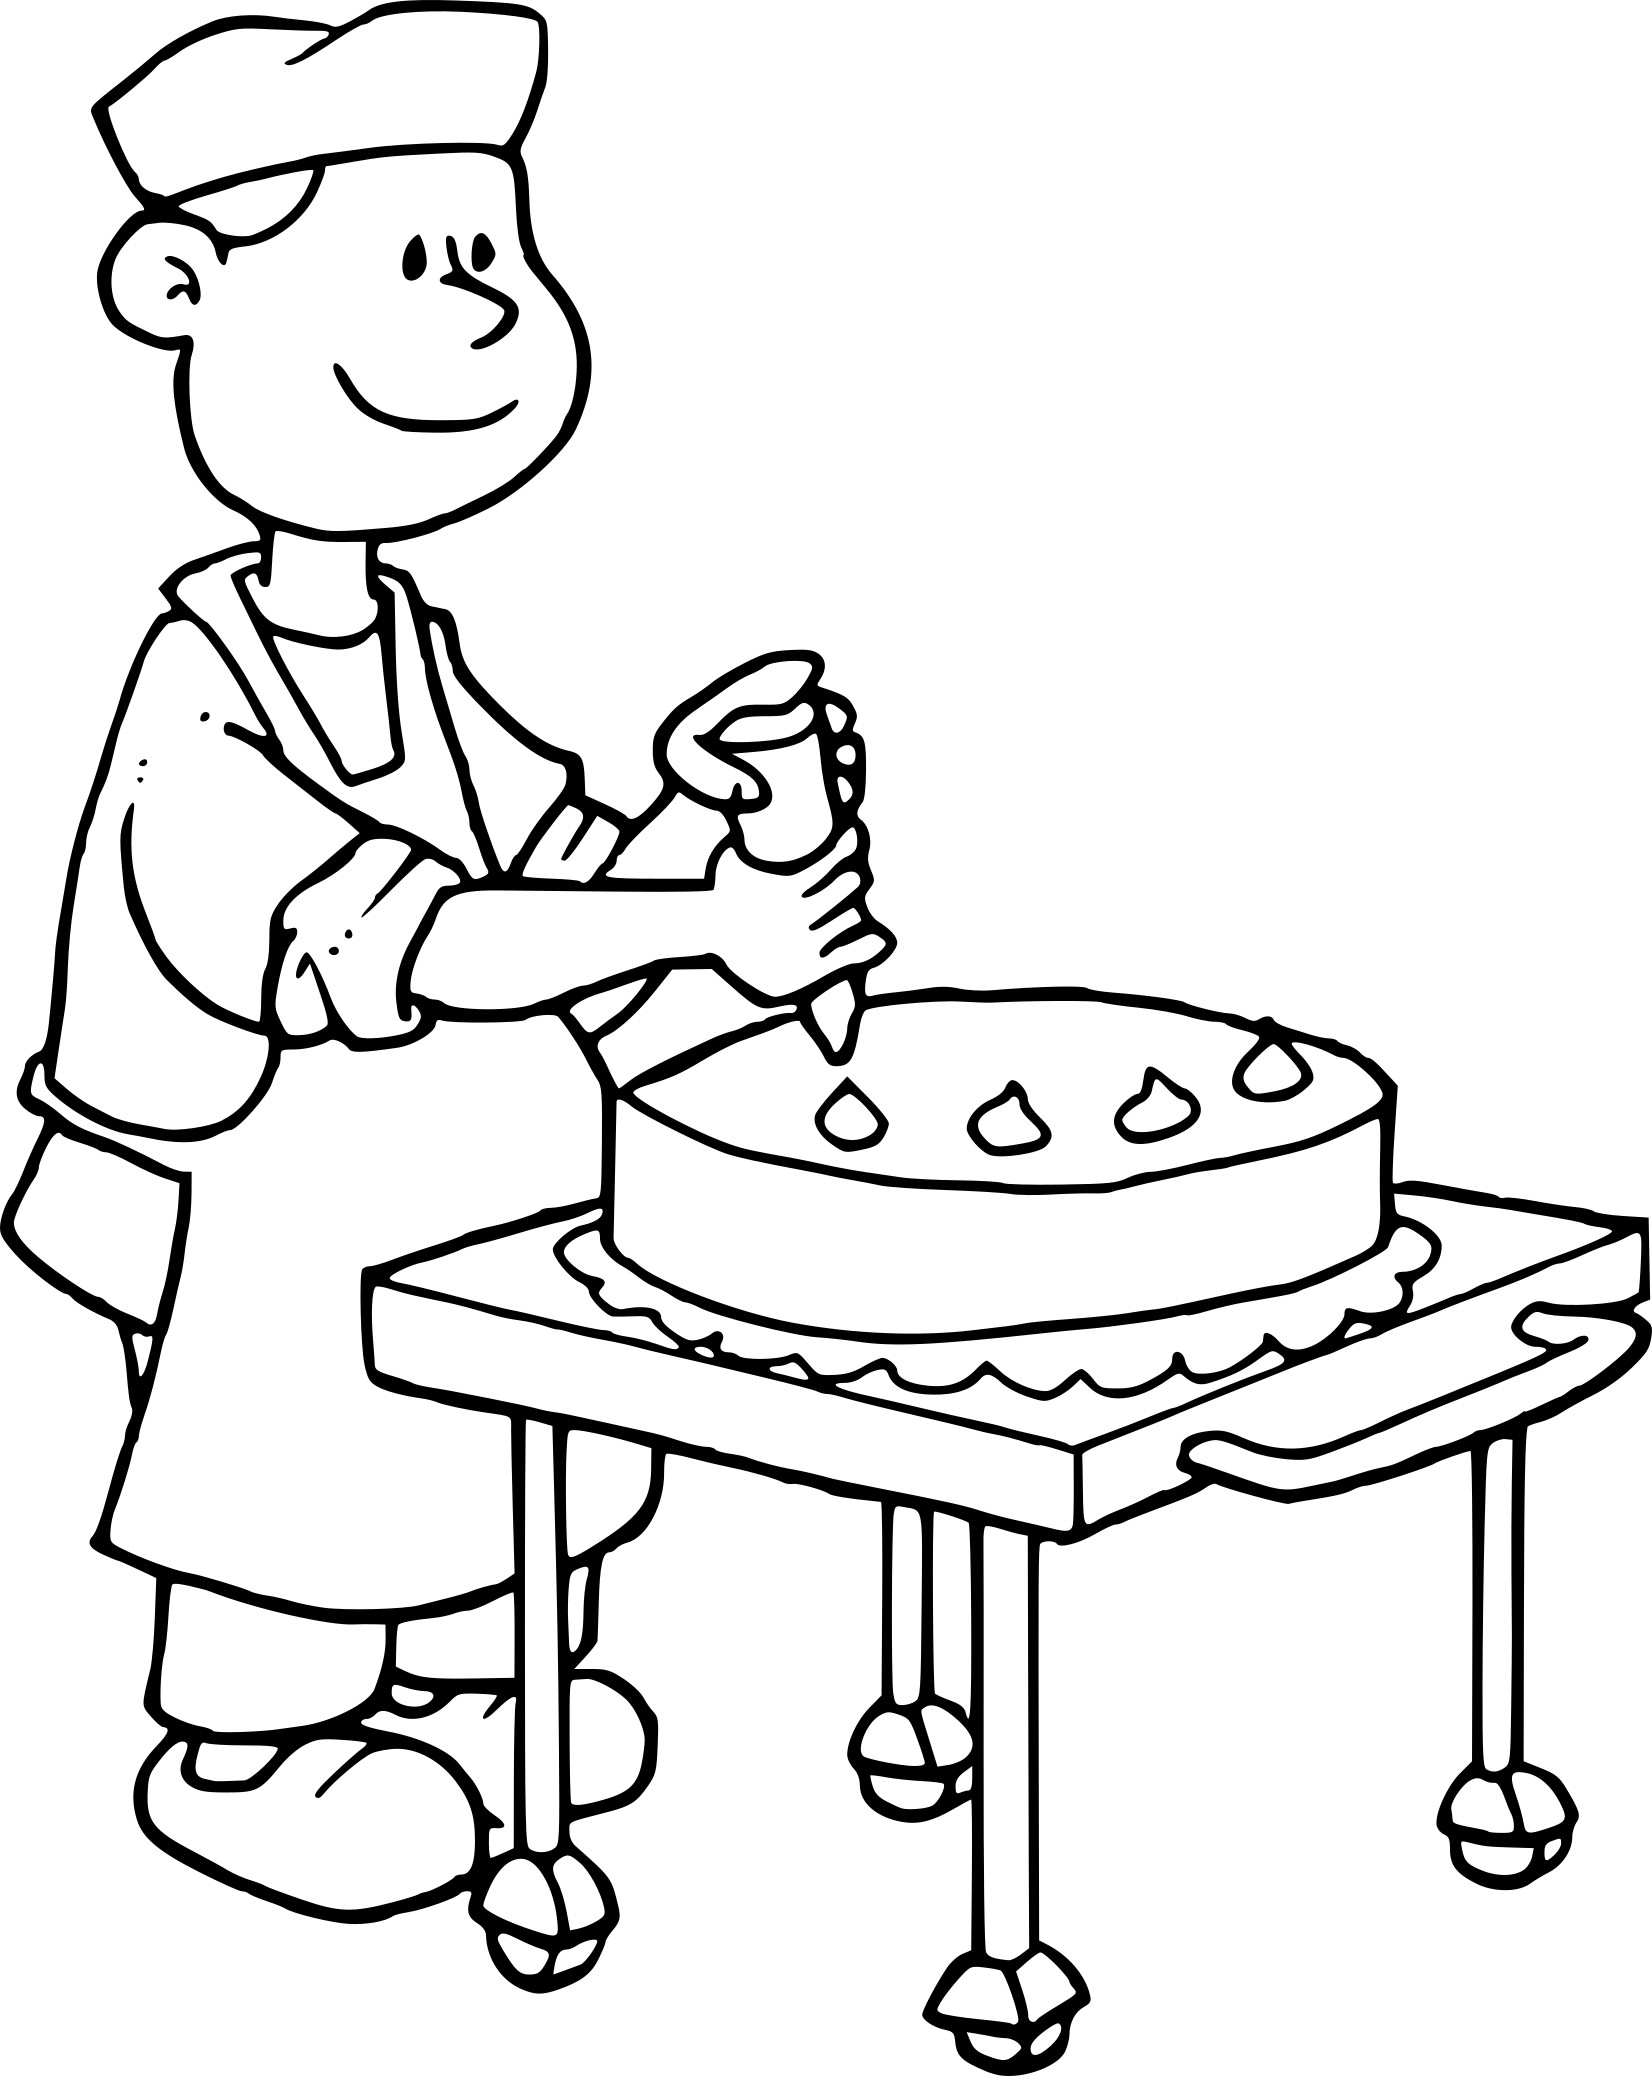 Patissier coloring page